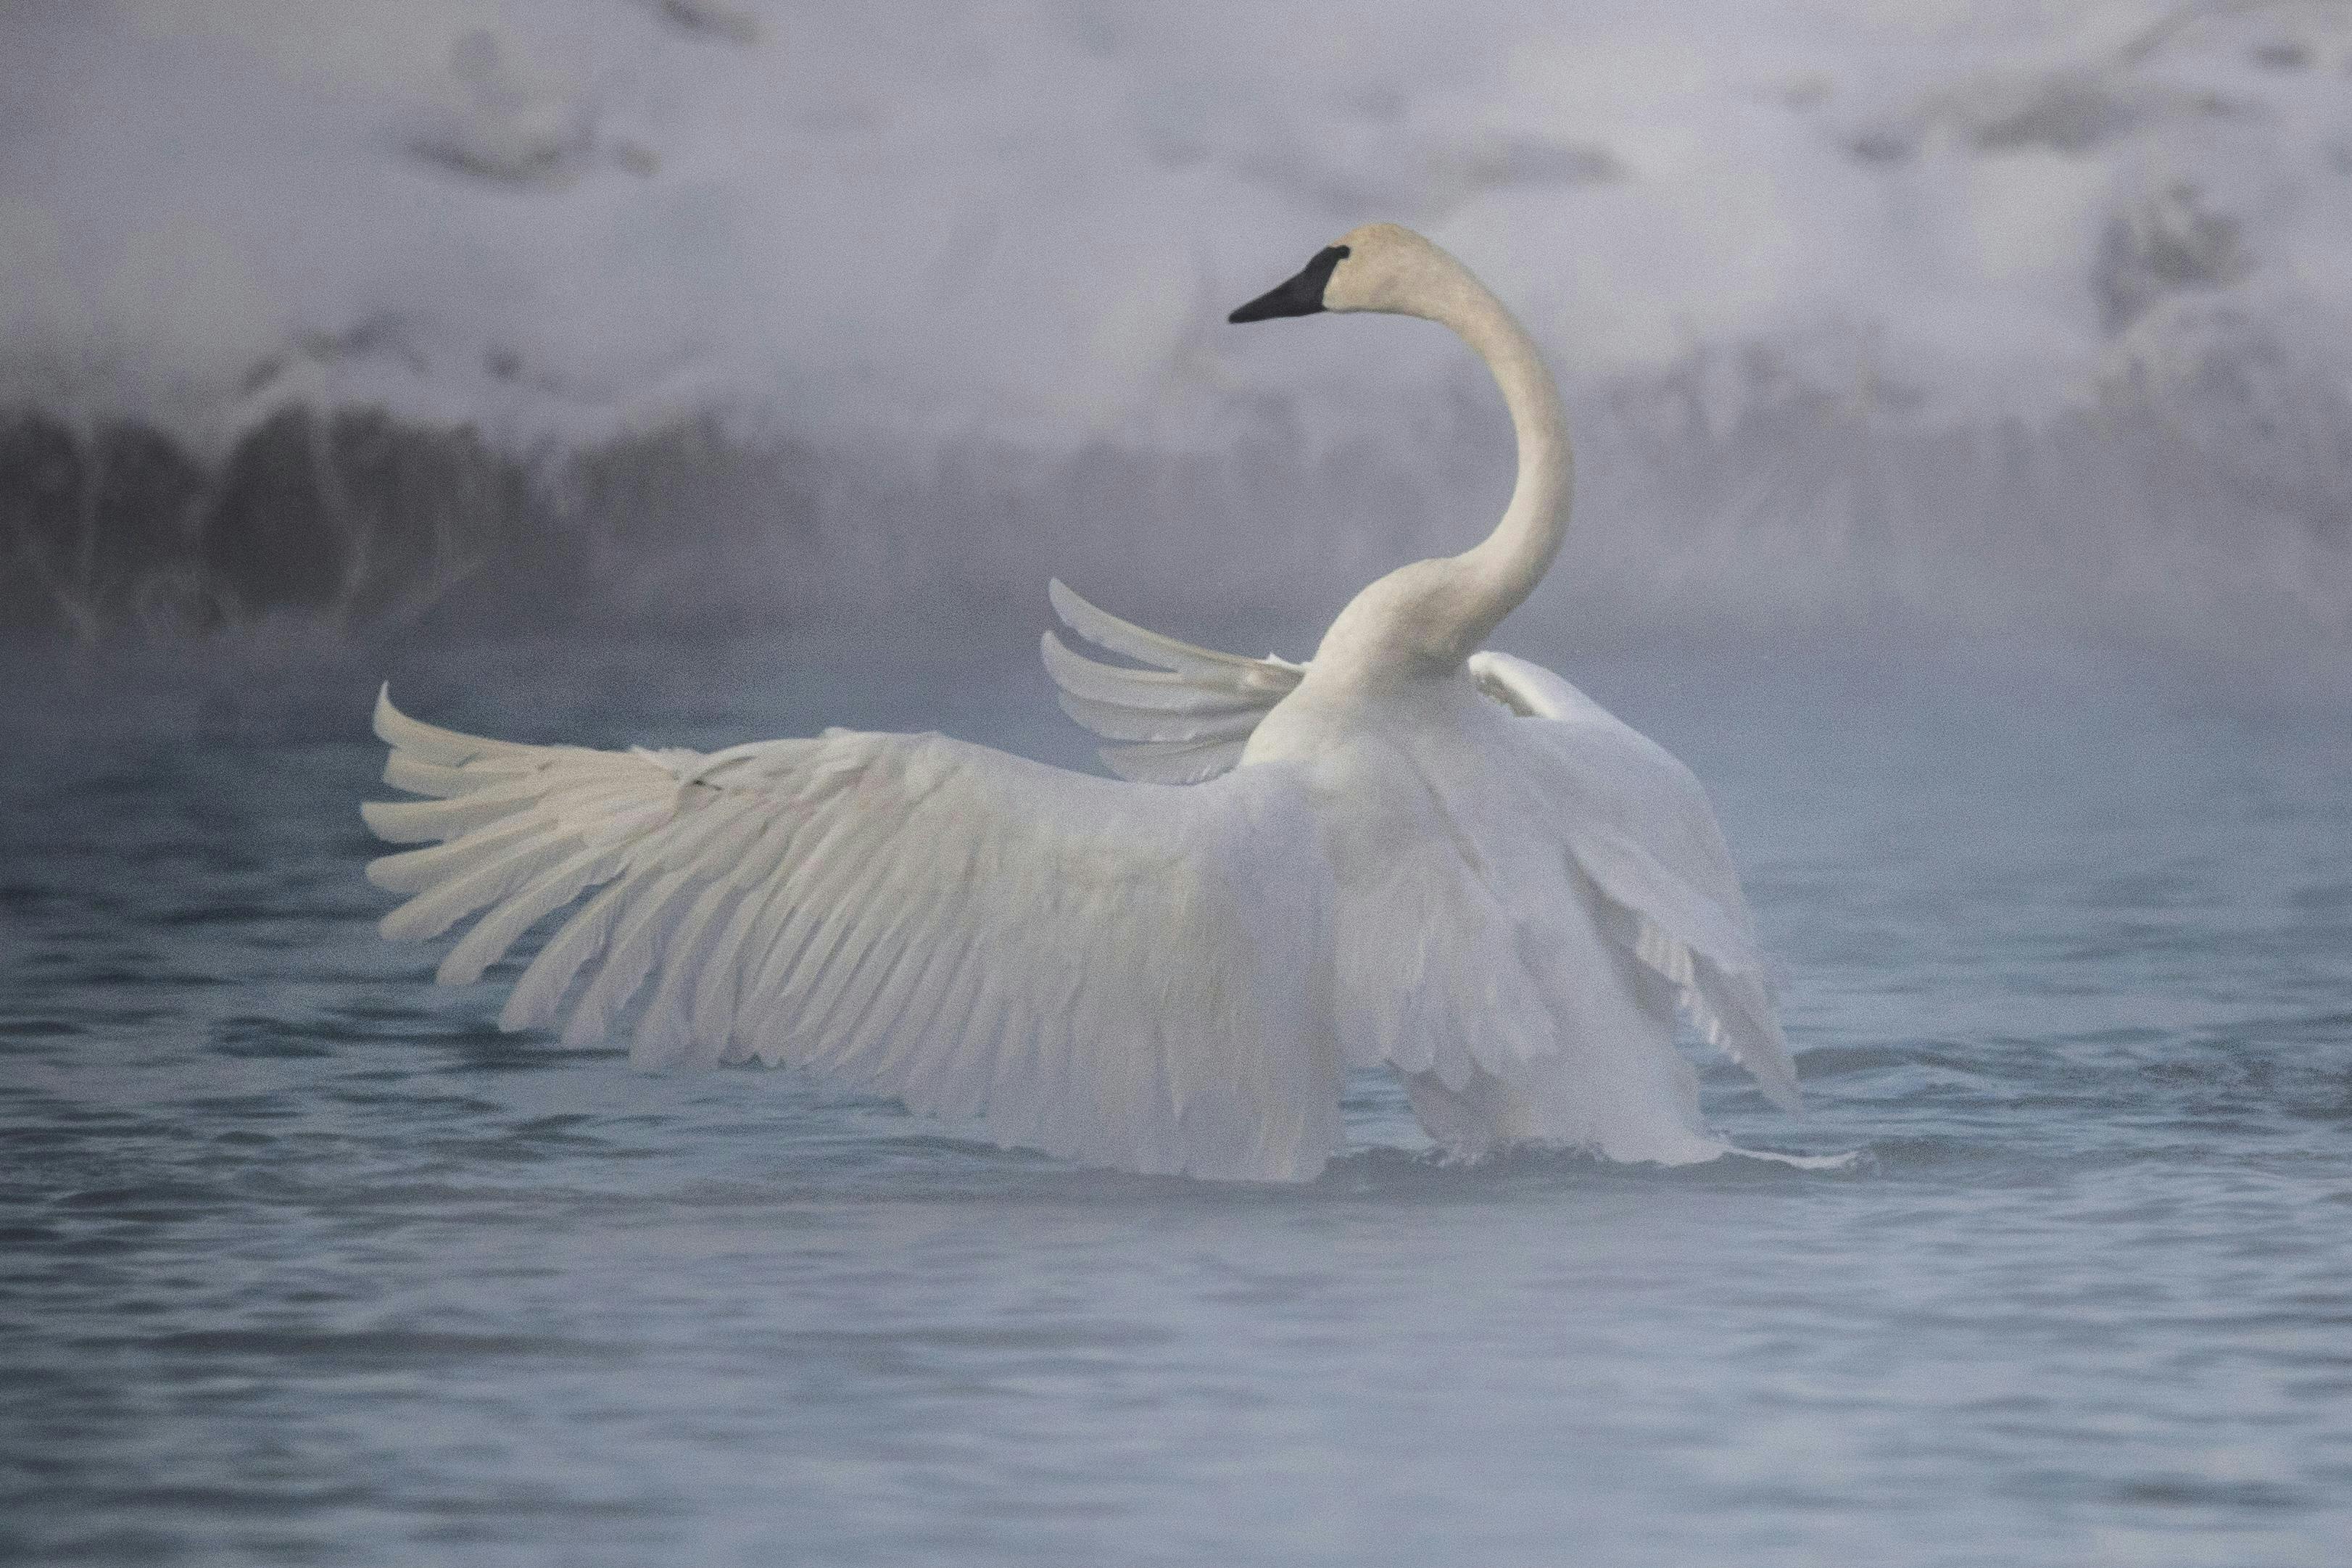 Trumpeter Swan in the water on a frosty morning.